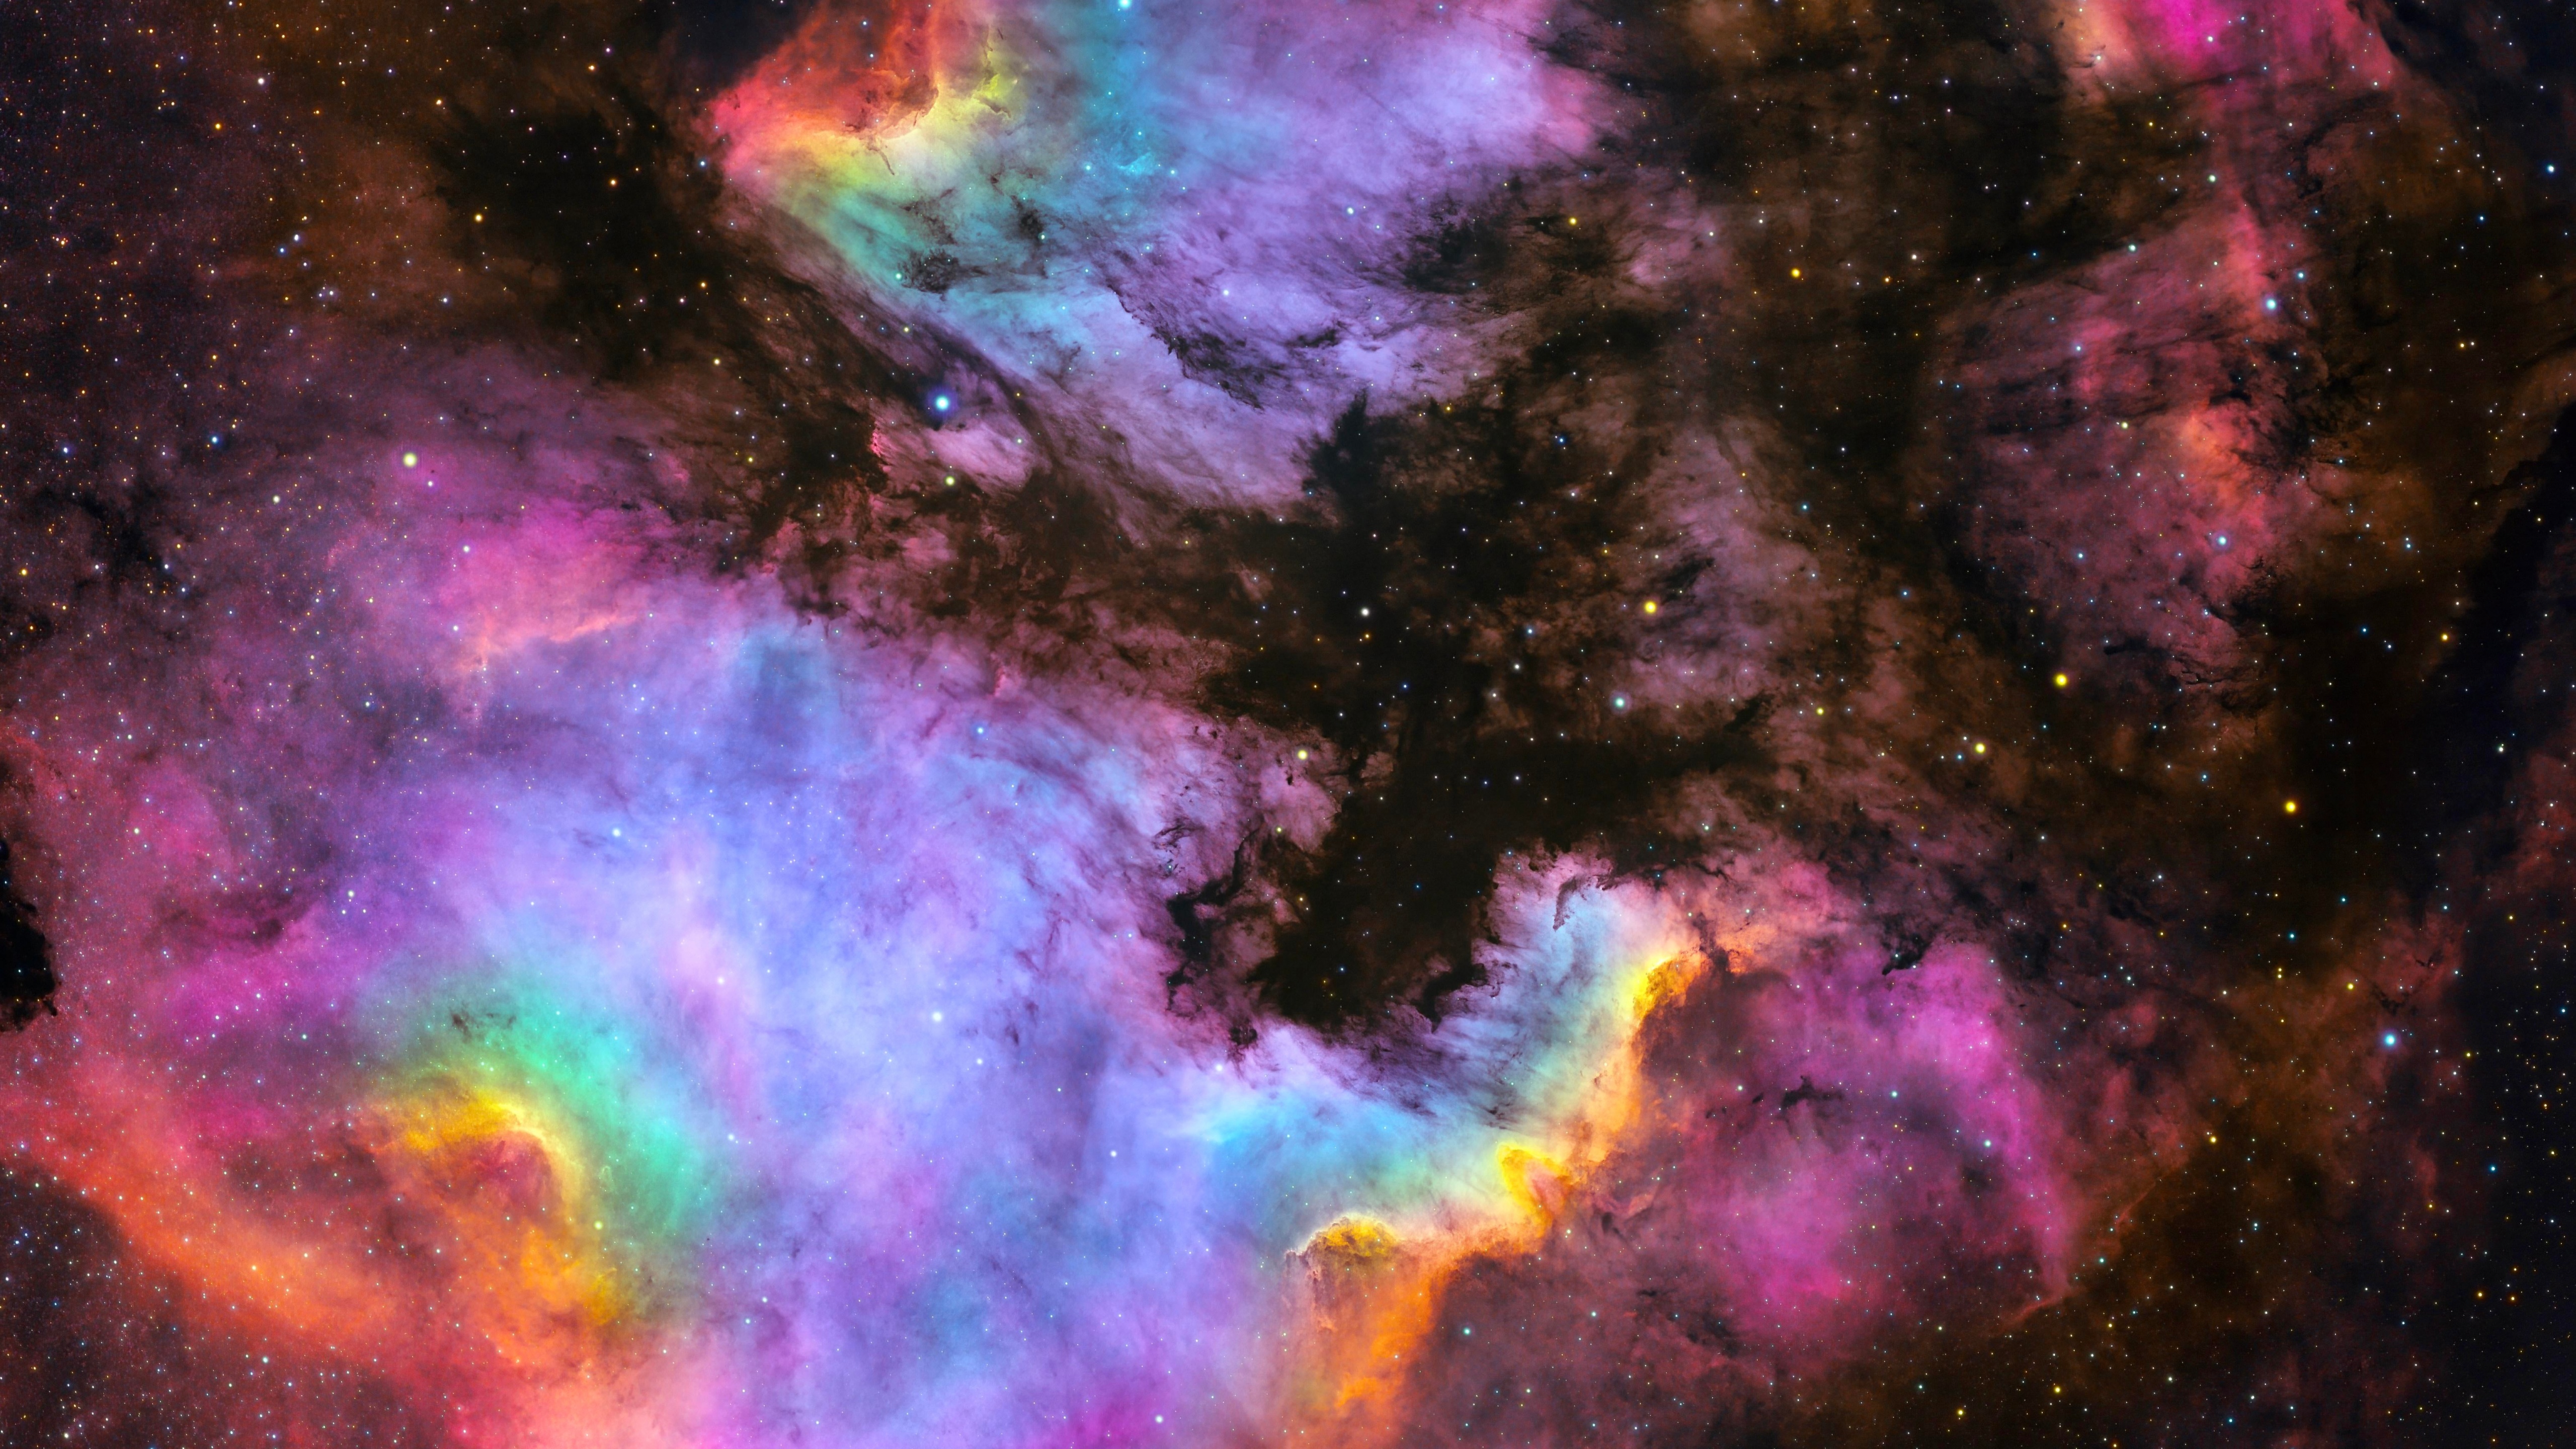 Download Nebula wallpapers for mobile phone free Nebula HD pictures